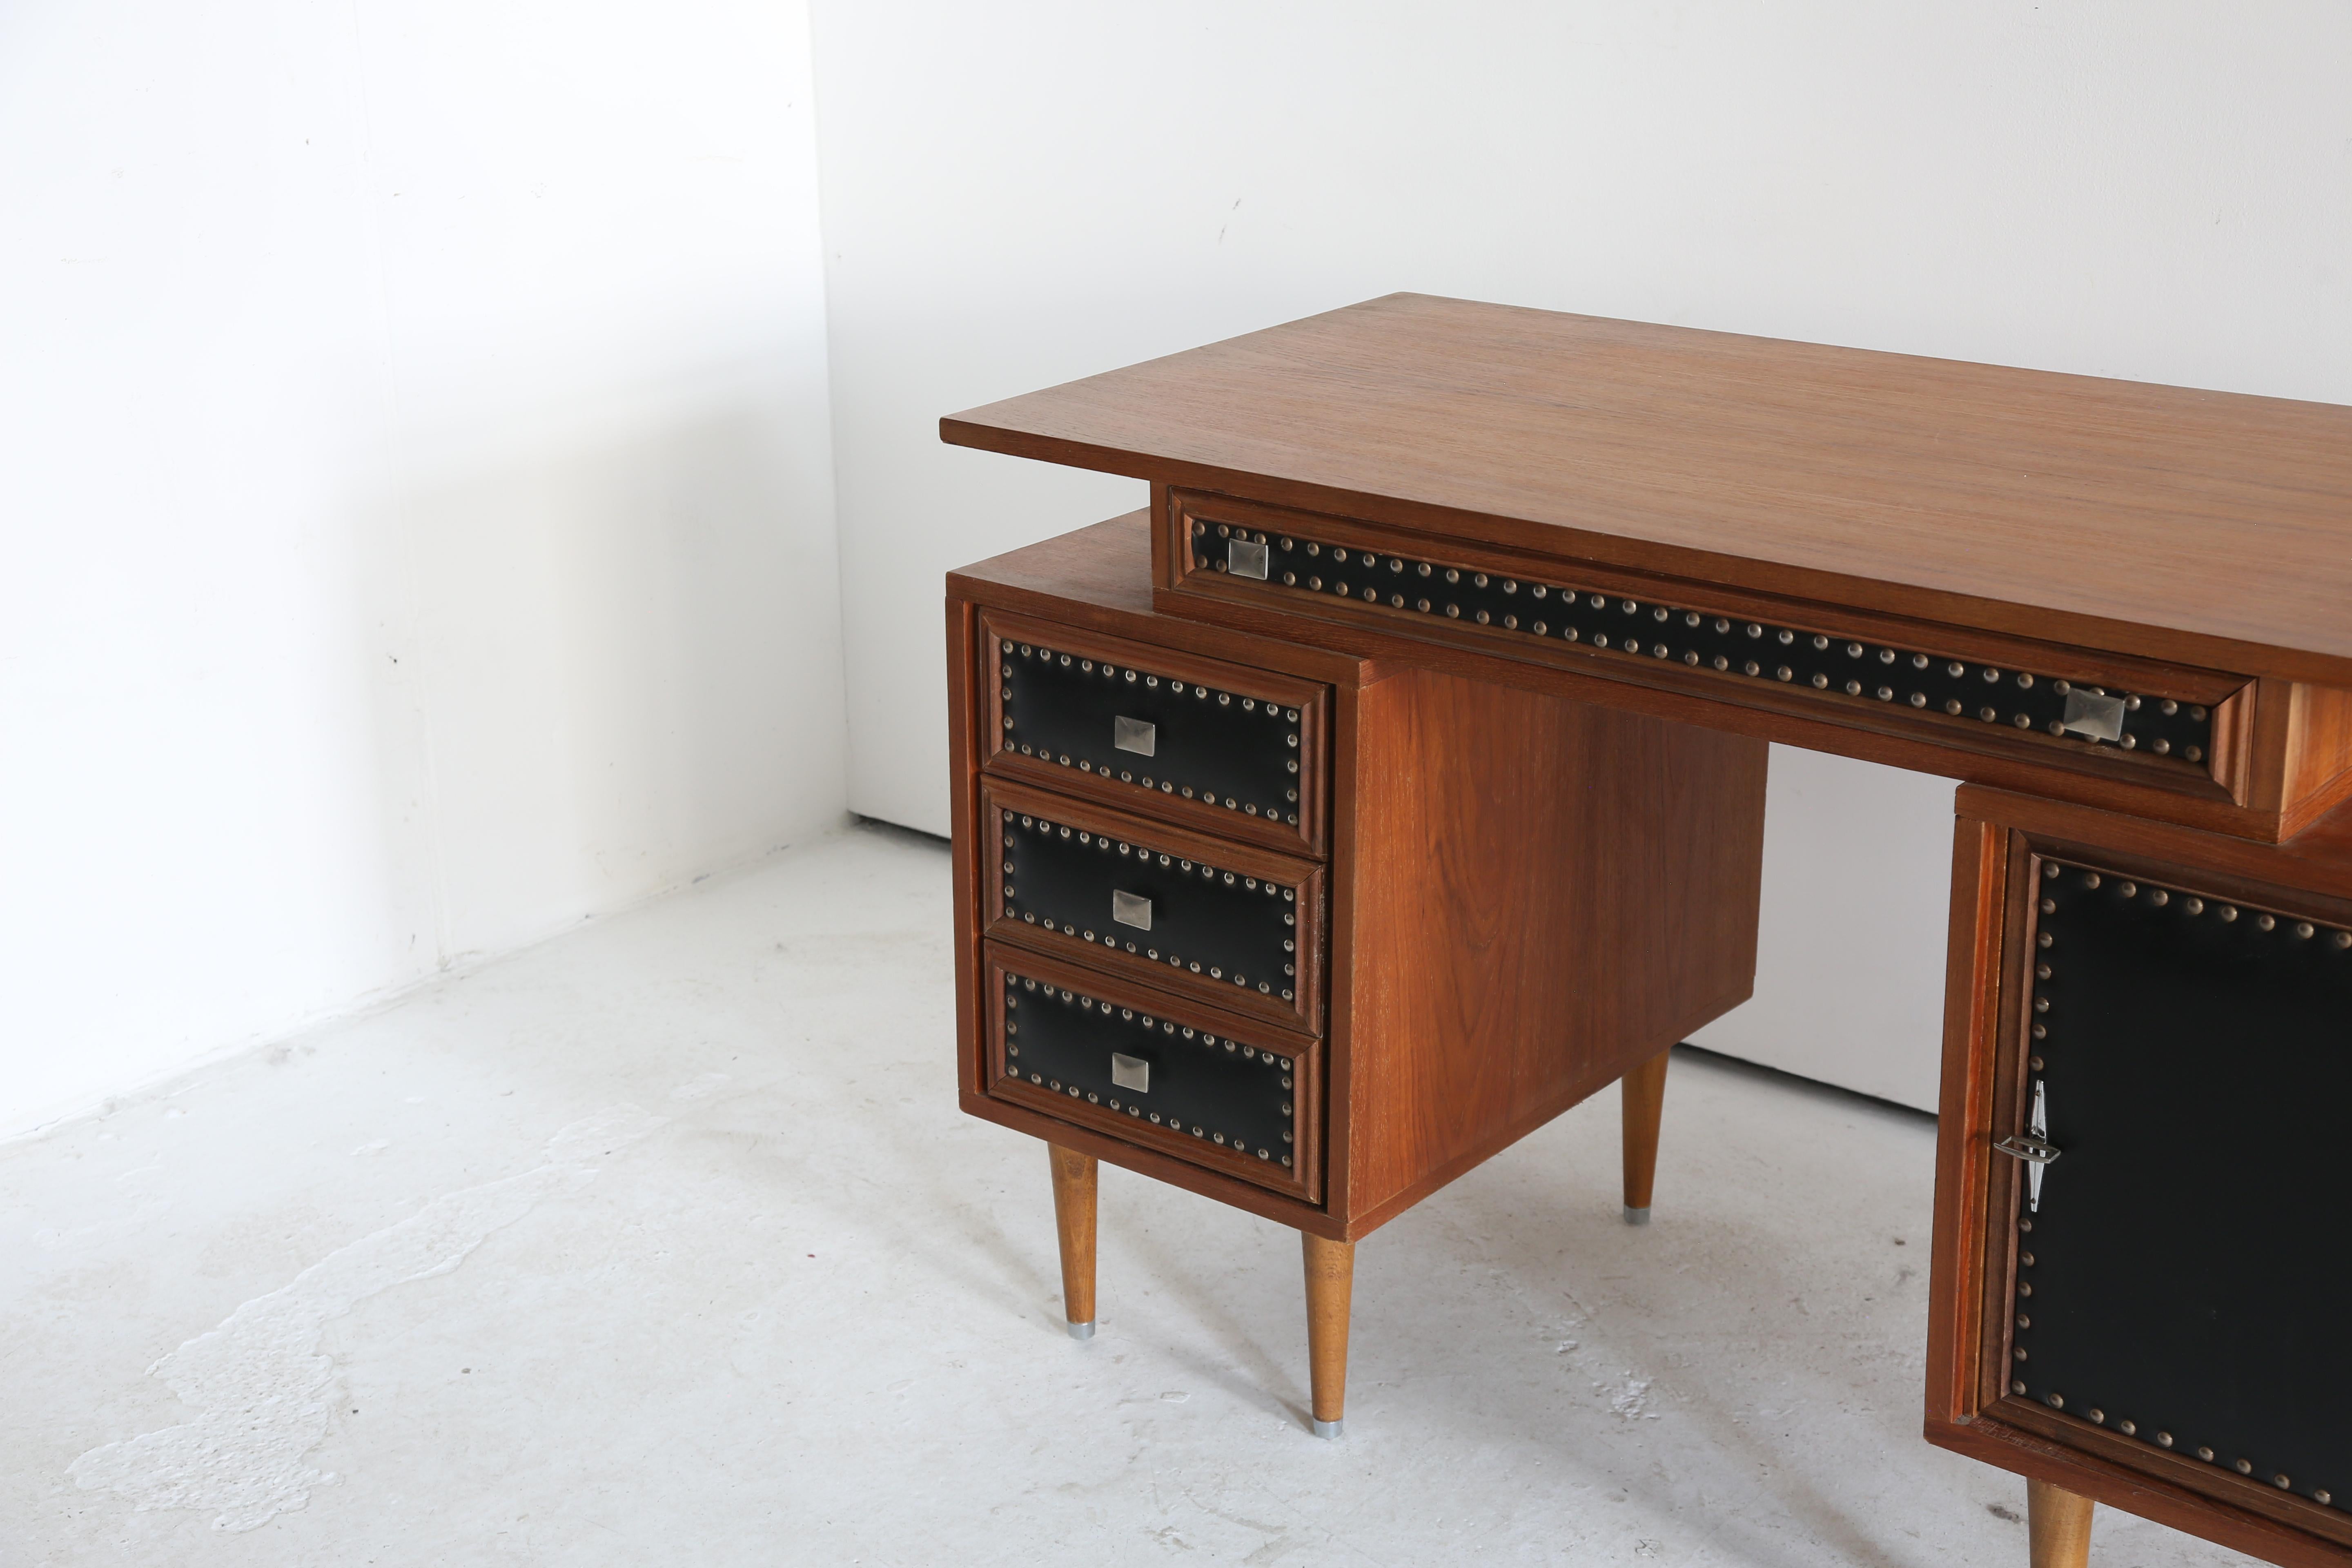 Outstanding studded detail teak desk.

An almost architectural feel to the proportions and construction.

Some light marking in places as to be expected, see photos.

France 1970s

L 120 cm x H 77 cm x D 61 cm